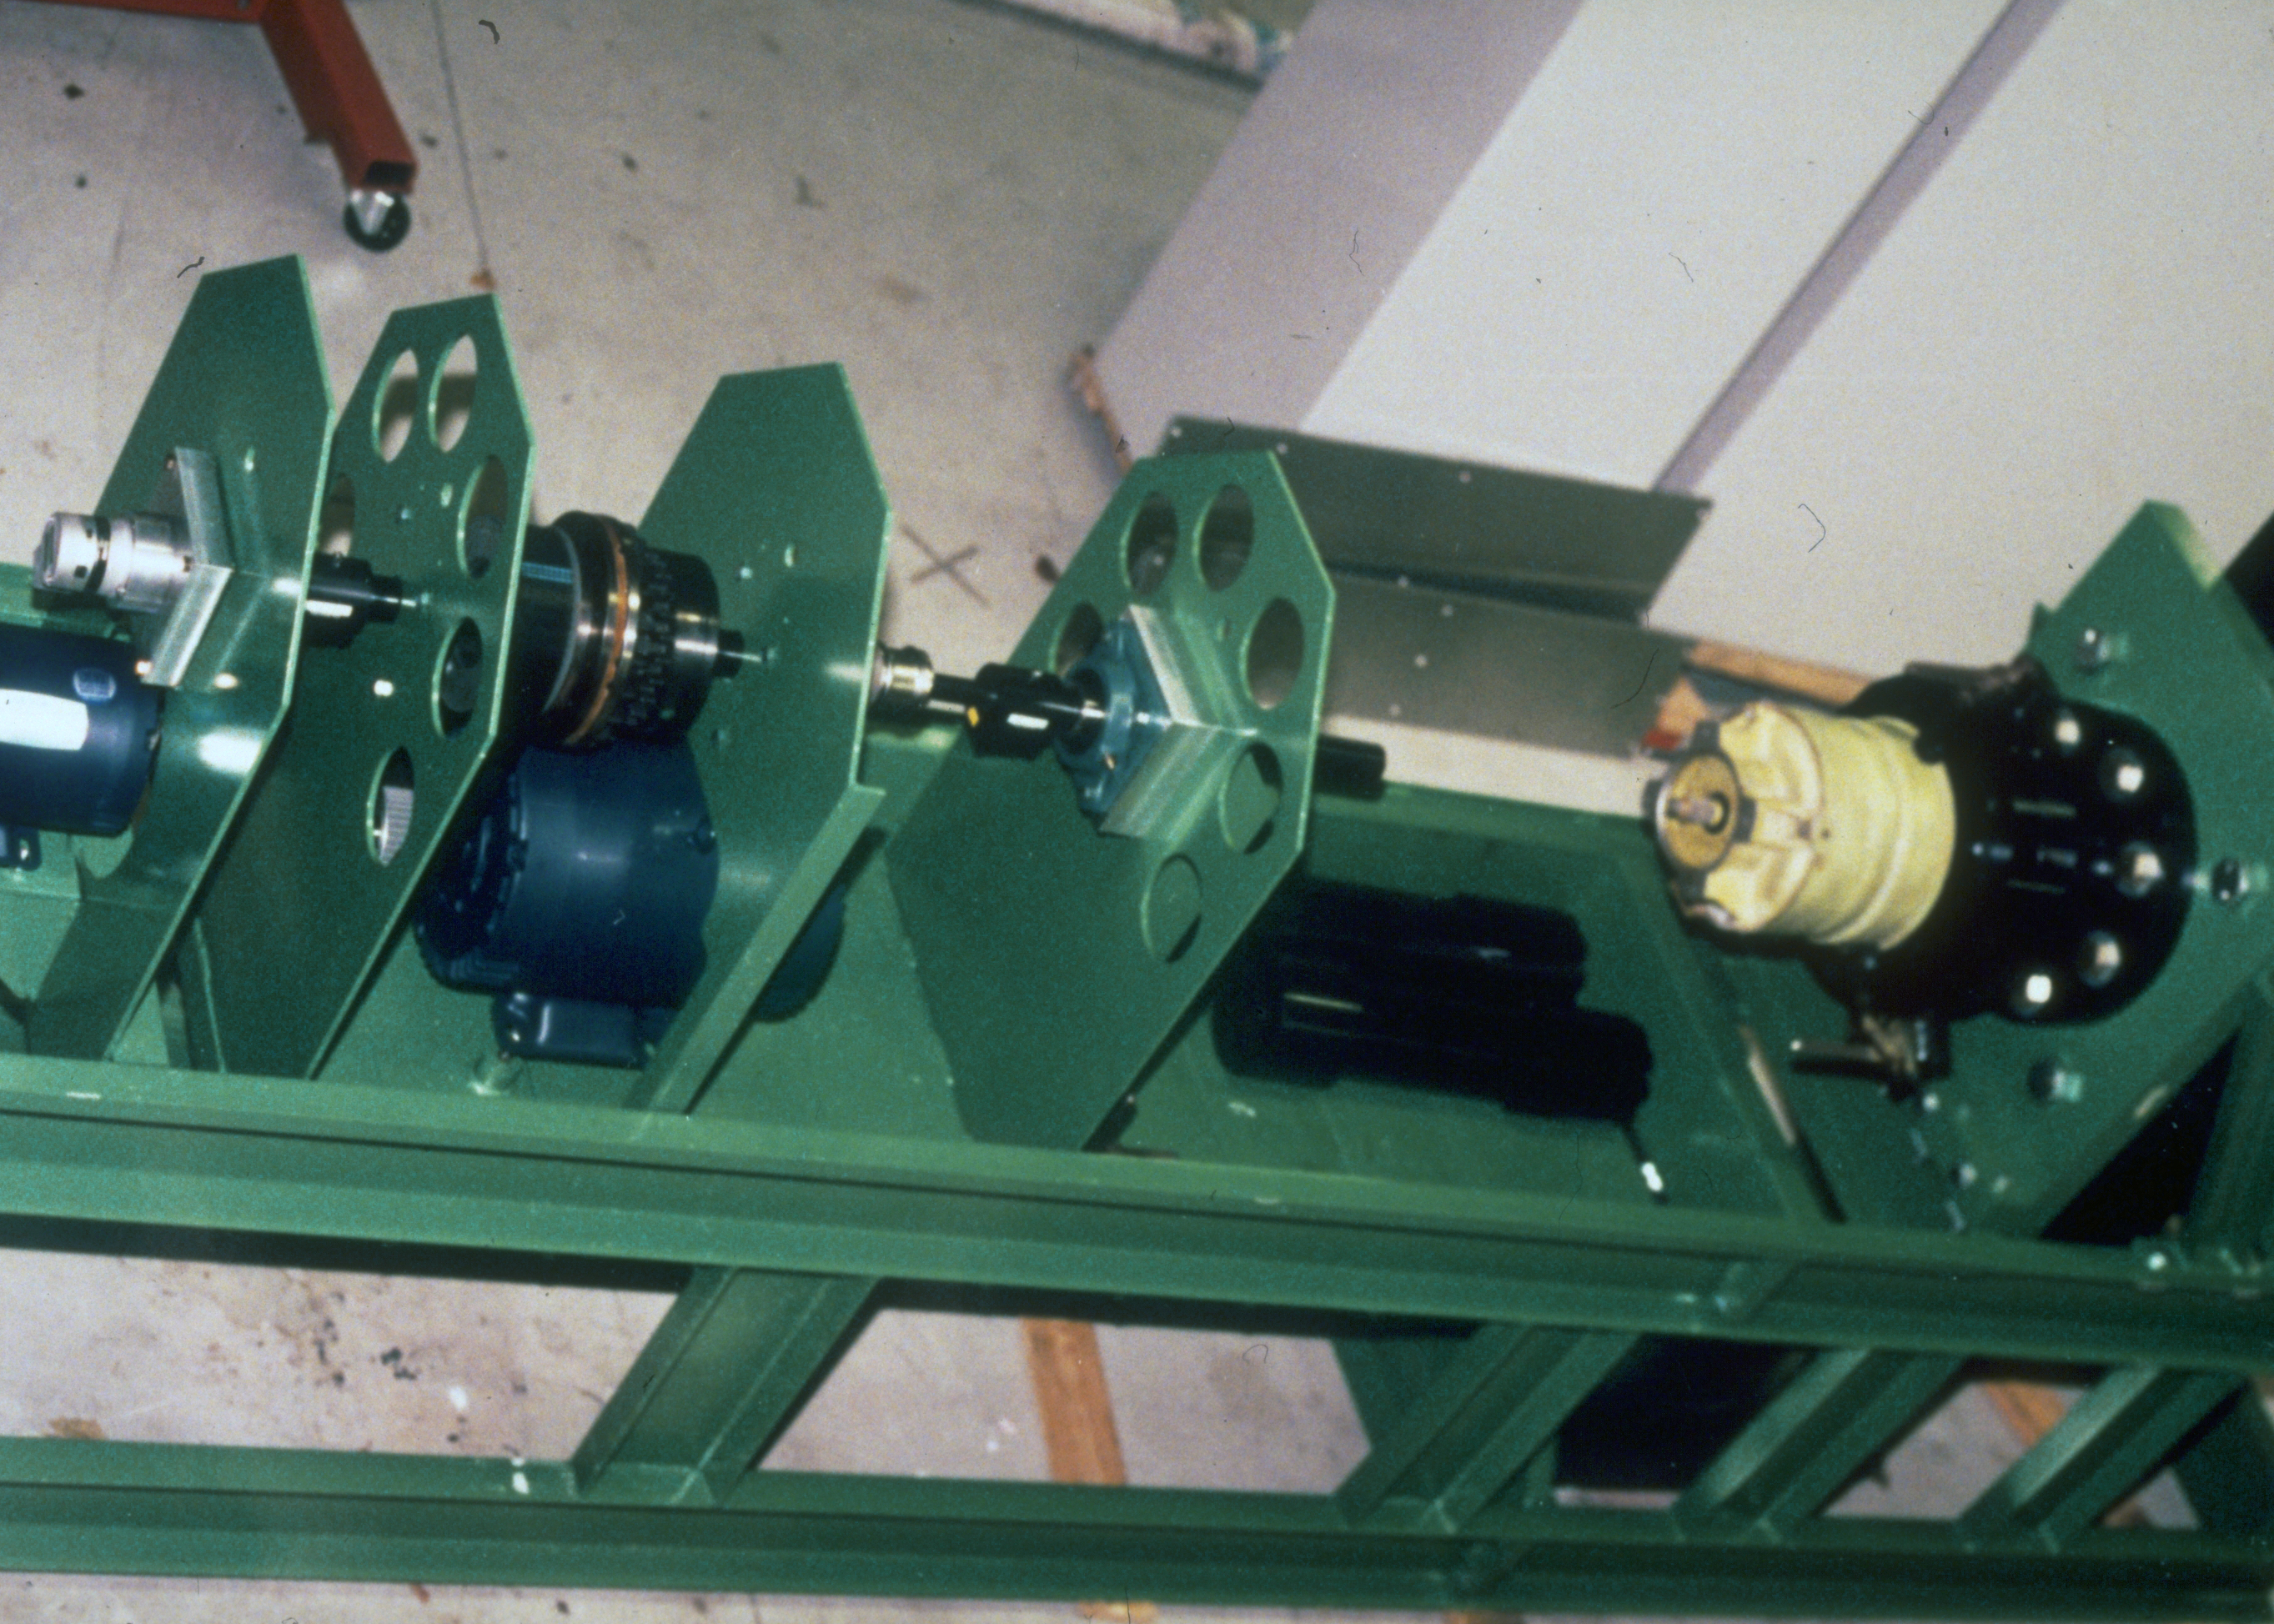 Boeing 767 Trailing Edge Flap Drive Test Stand